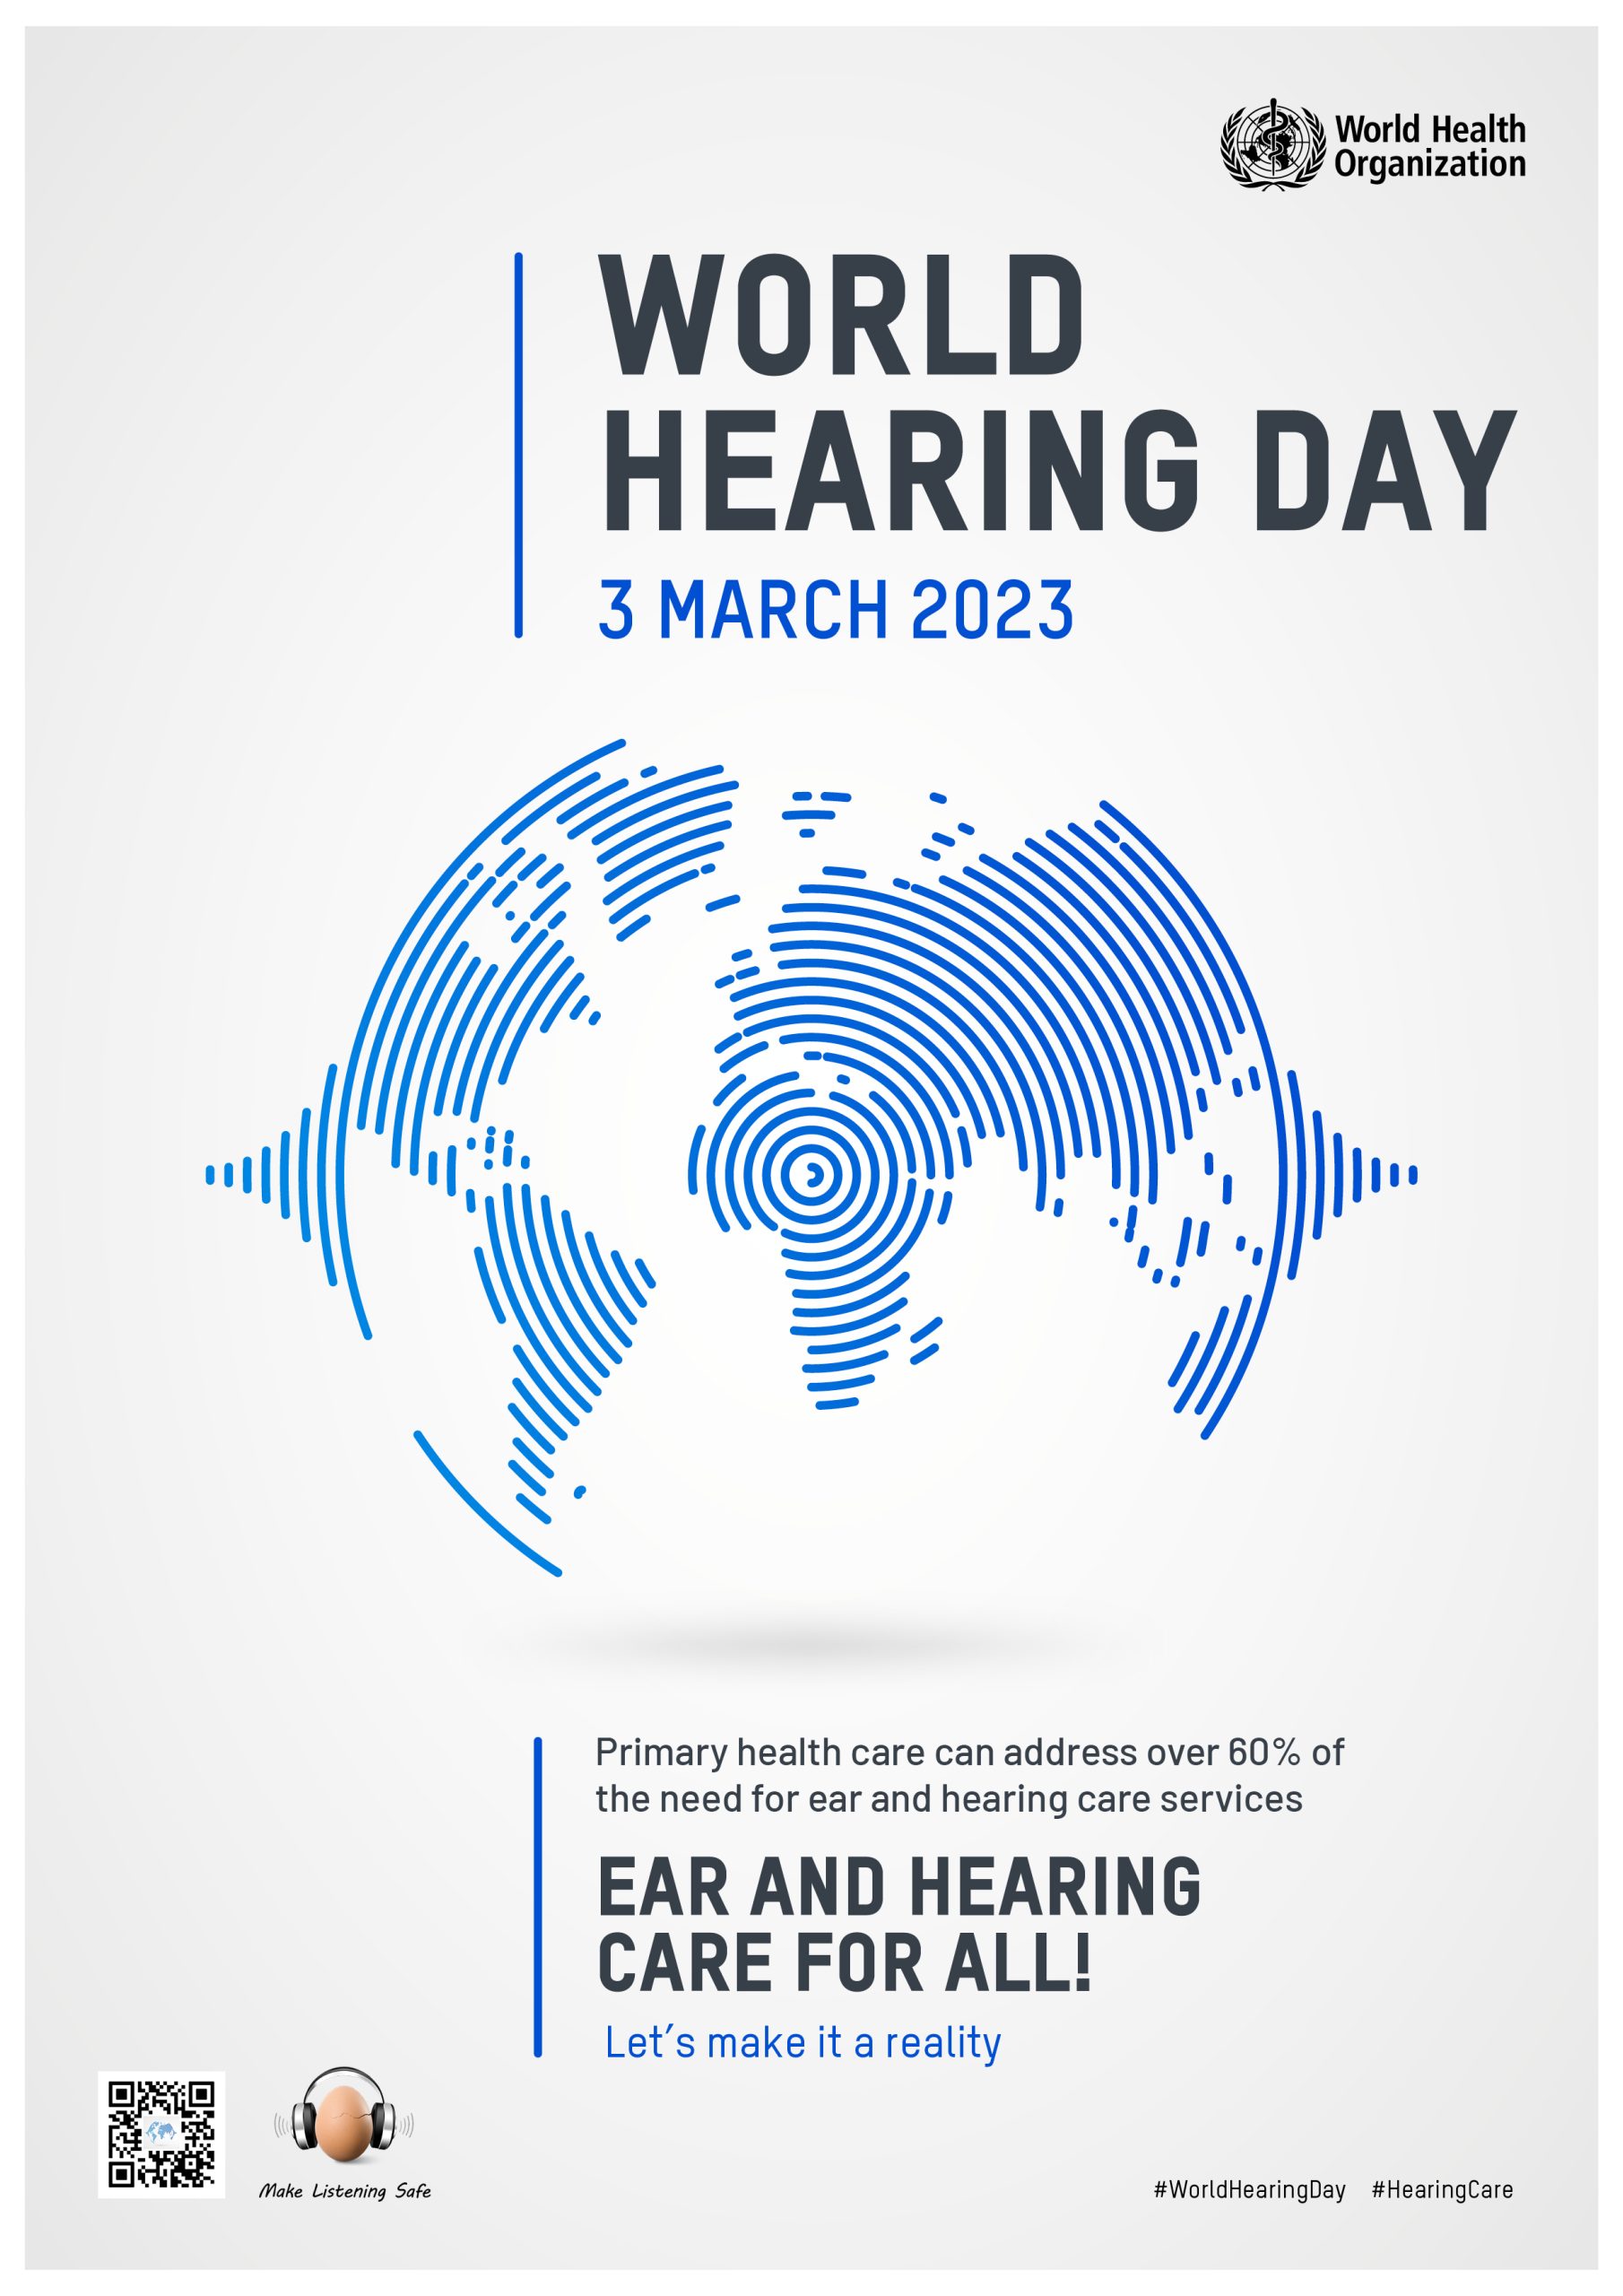 What you need to know about World Hearing Day 2023